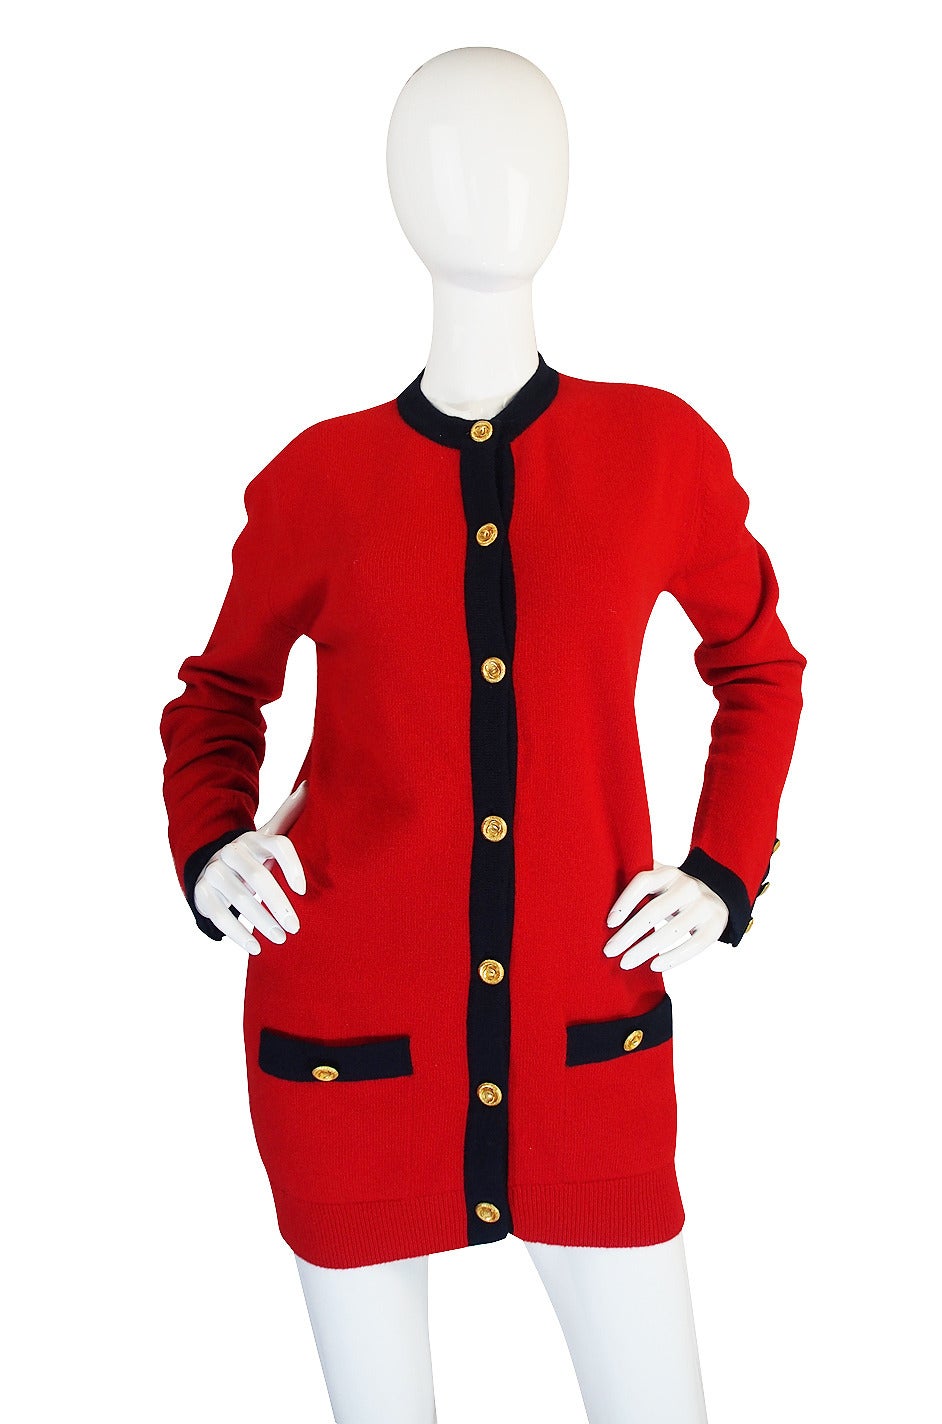 This is a fantastic Chanel 100% cashmere cardigan that is a classic basic that has been done is a beautiful red with navy stripe detailing and will never go out of style. Made of the finest cashmere in the world, it is luxurious and feels amazing